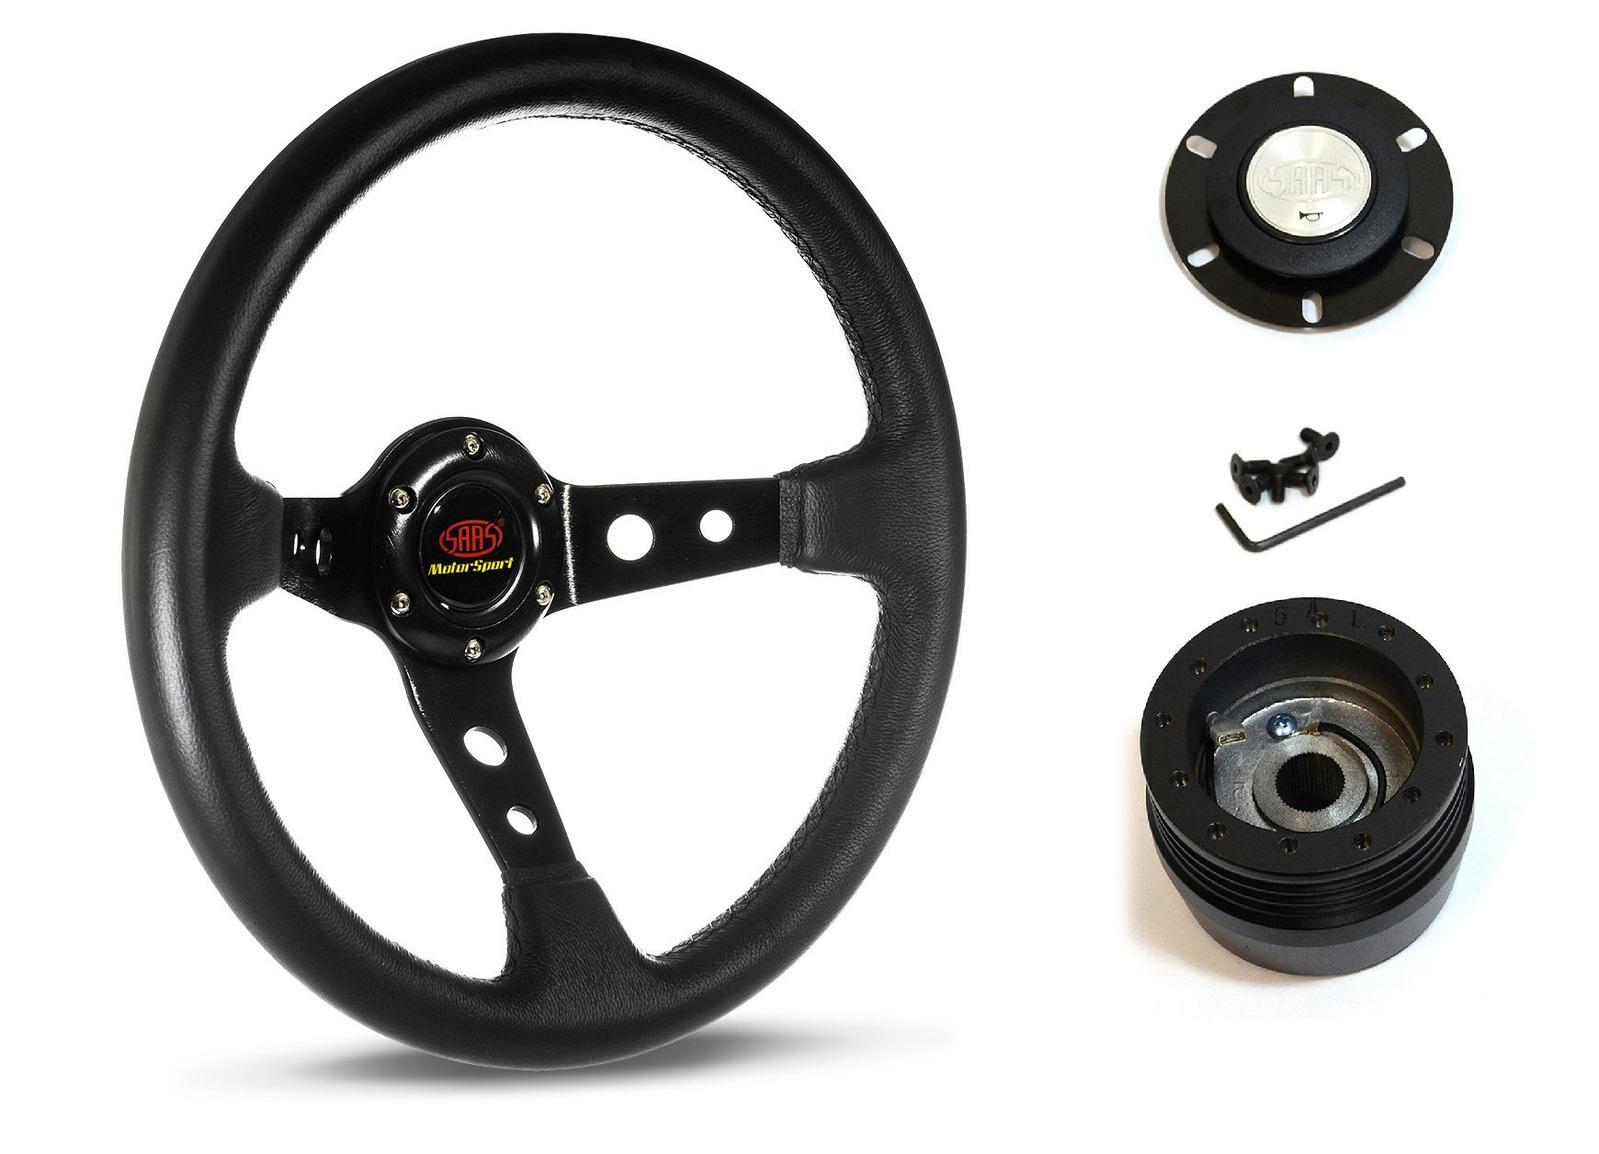 SAAS Steering Wheel Leather 14" ADR GT Deep Dish Black With Holes SWGT3 and SAAS boss kit for Nissan NX Coupe B13 1991-1996